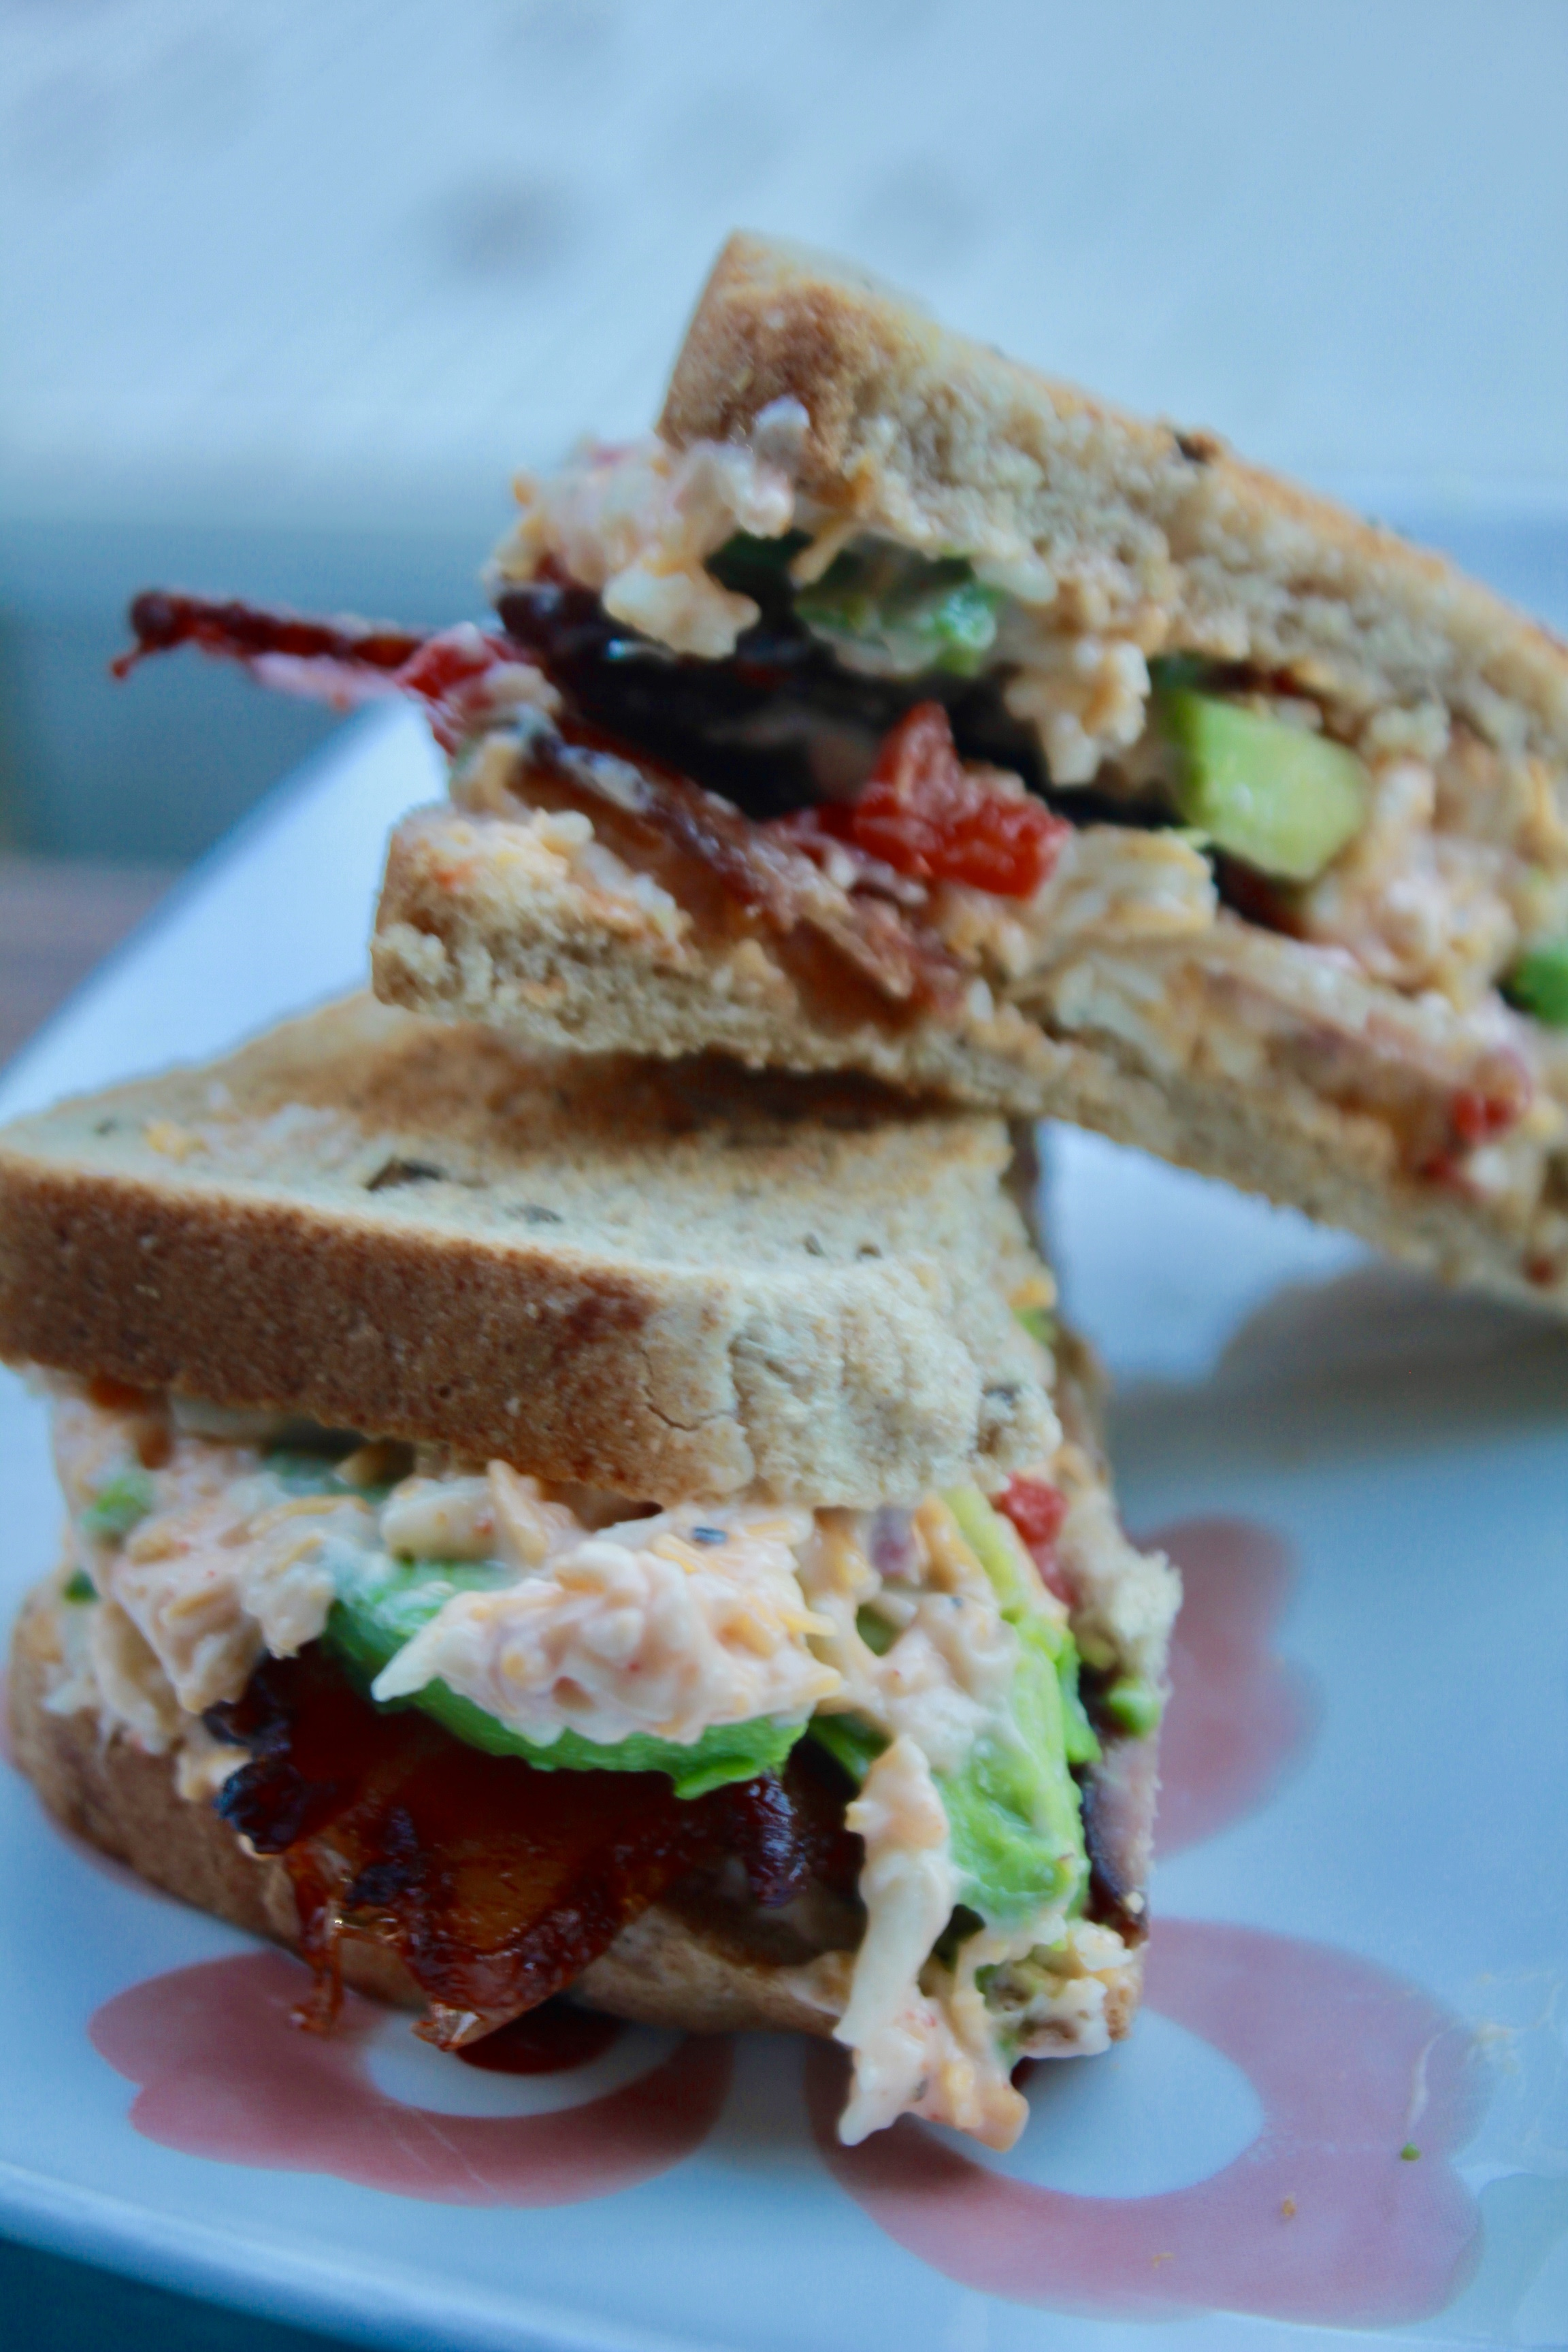 Spicy Pimento Cheese Sandwiches with Avocado and Bacon